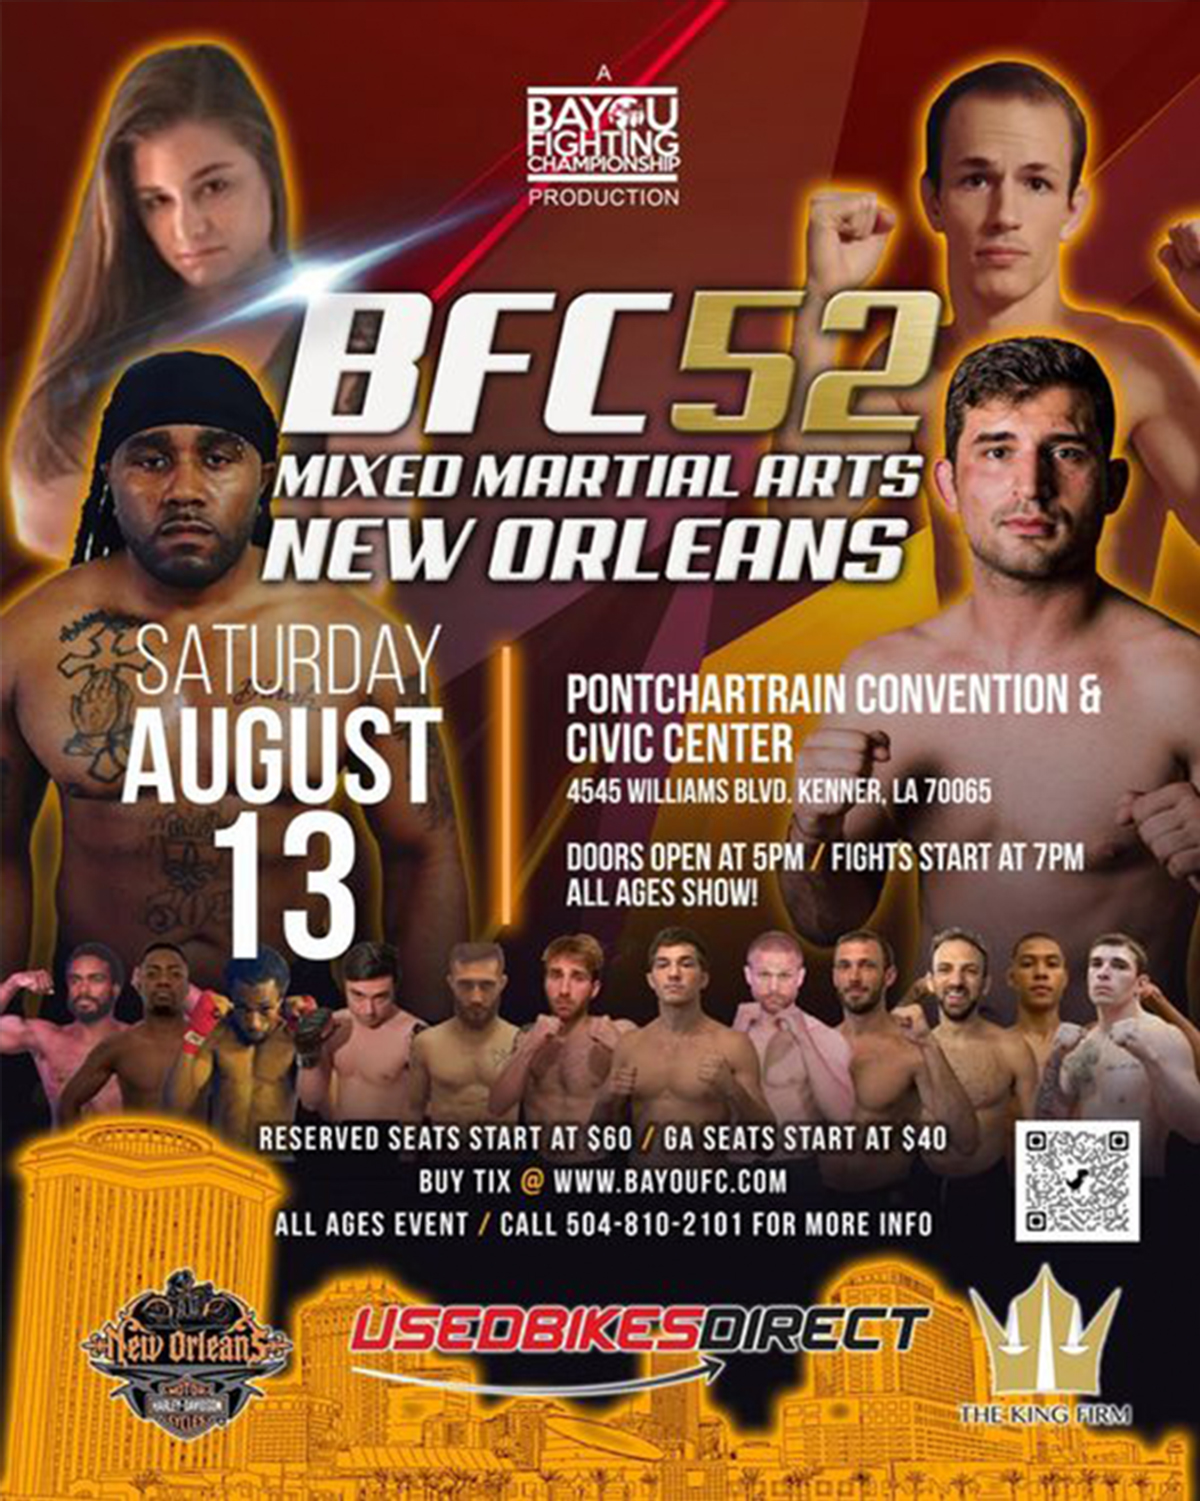 Bayou Fighting Championship 52 Live on Combat Sports Now